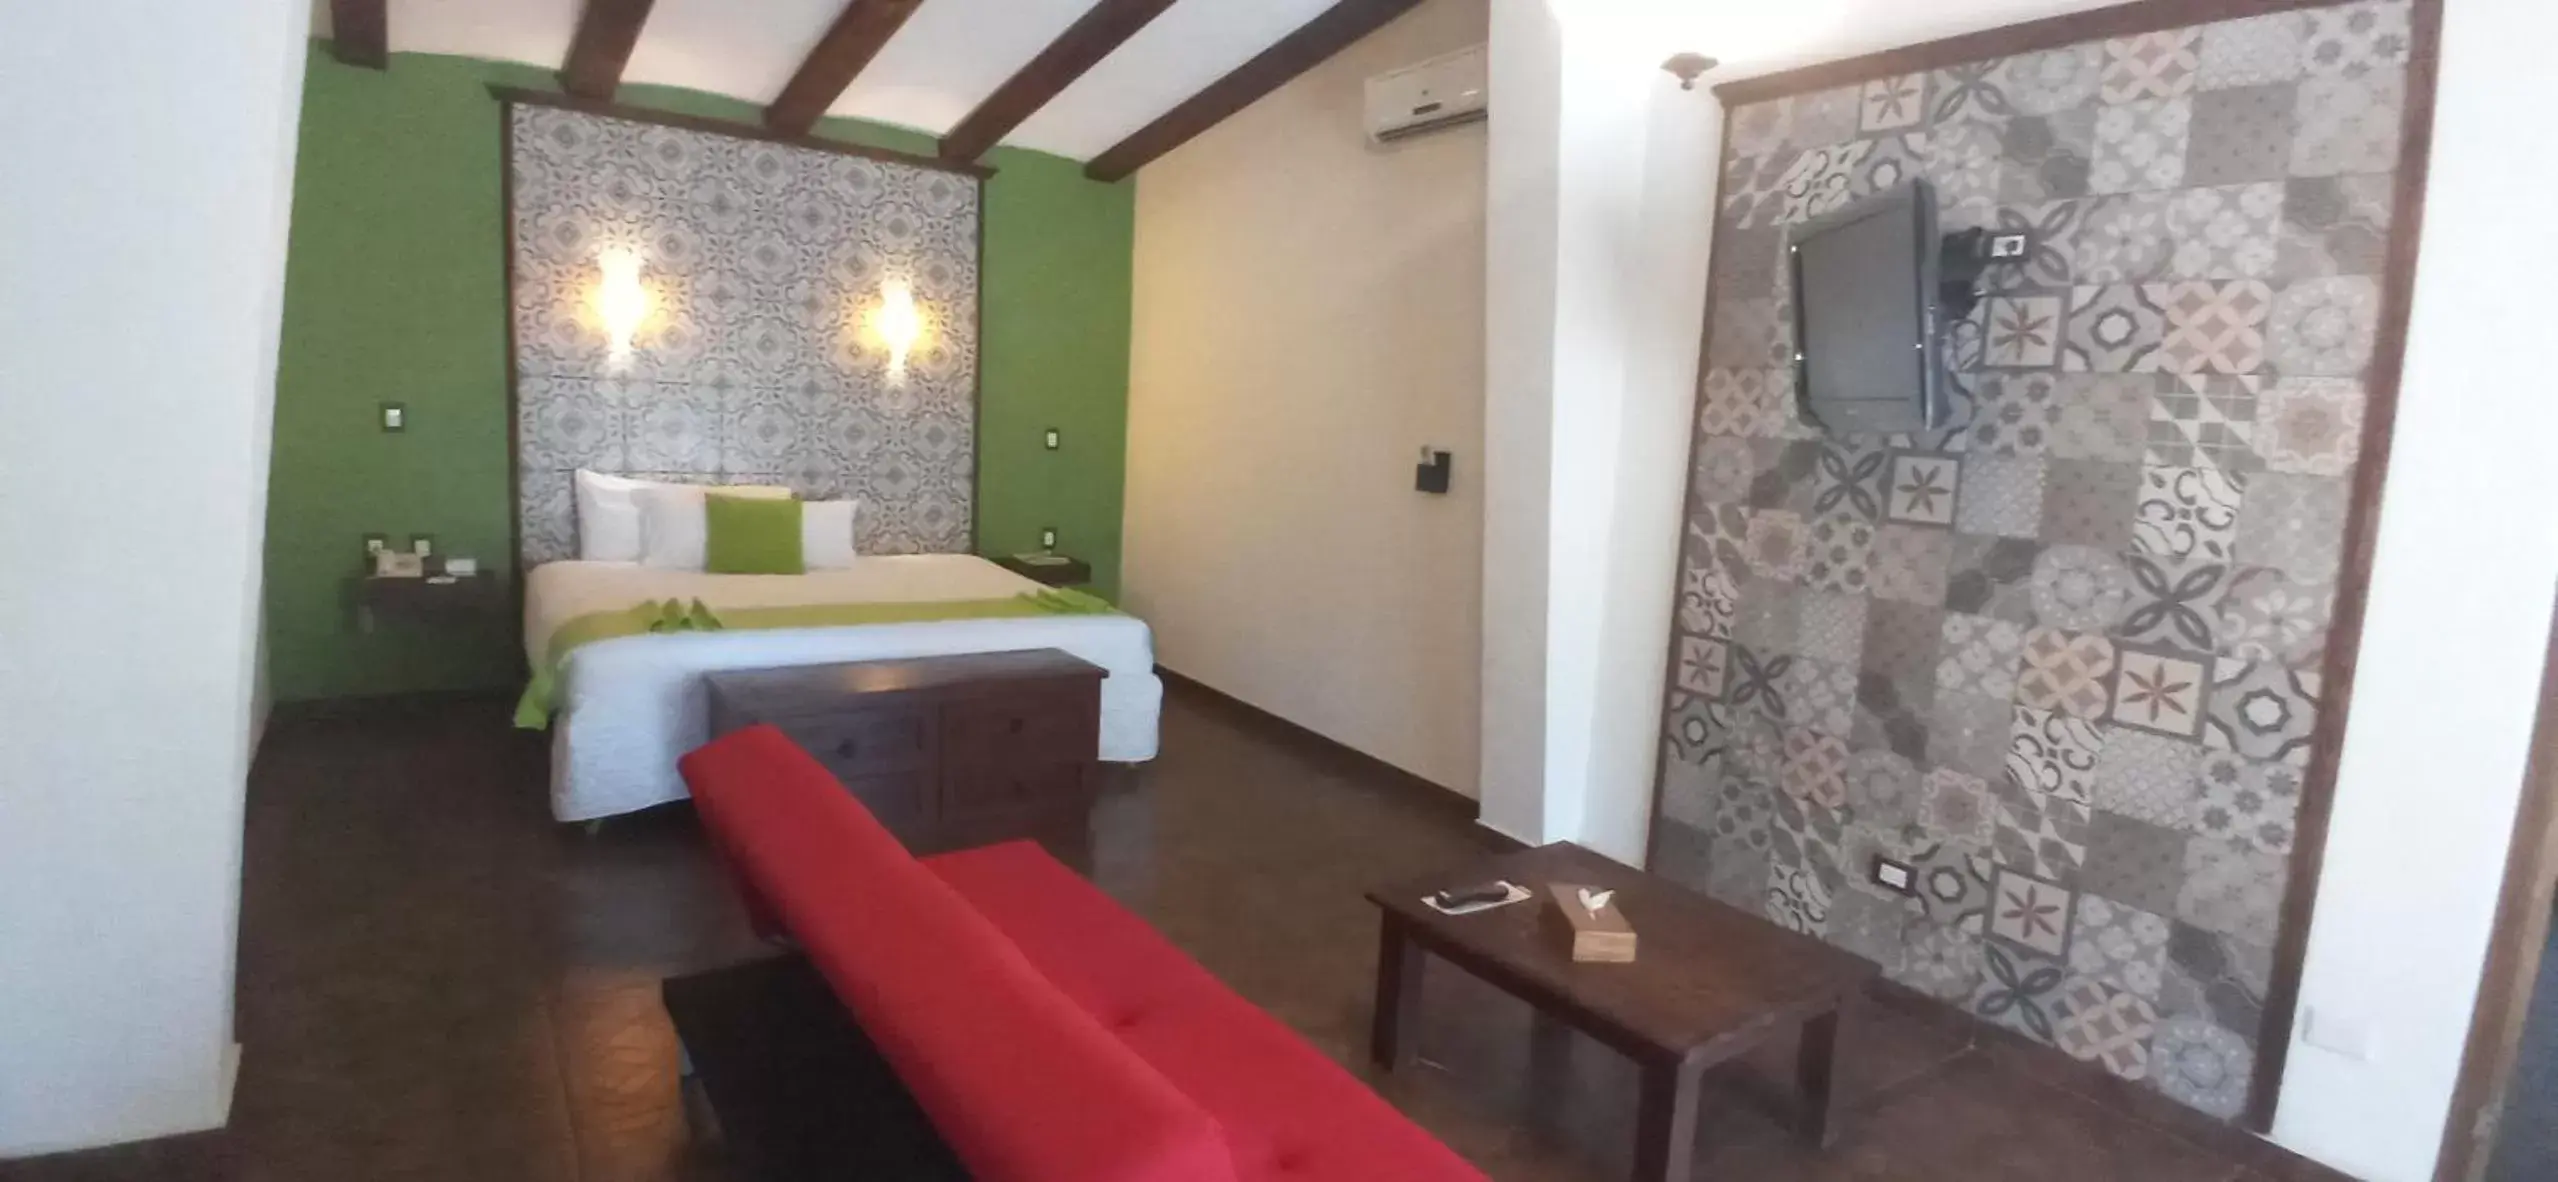 Villa in Hotel Medrano Temáticas and Business Rooms Aguascalientes